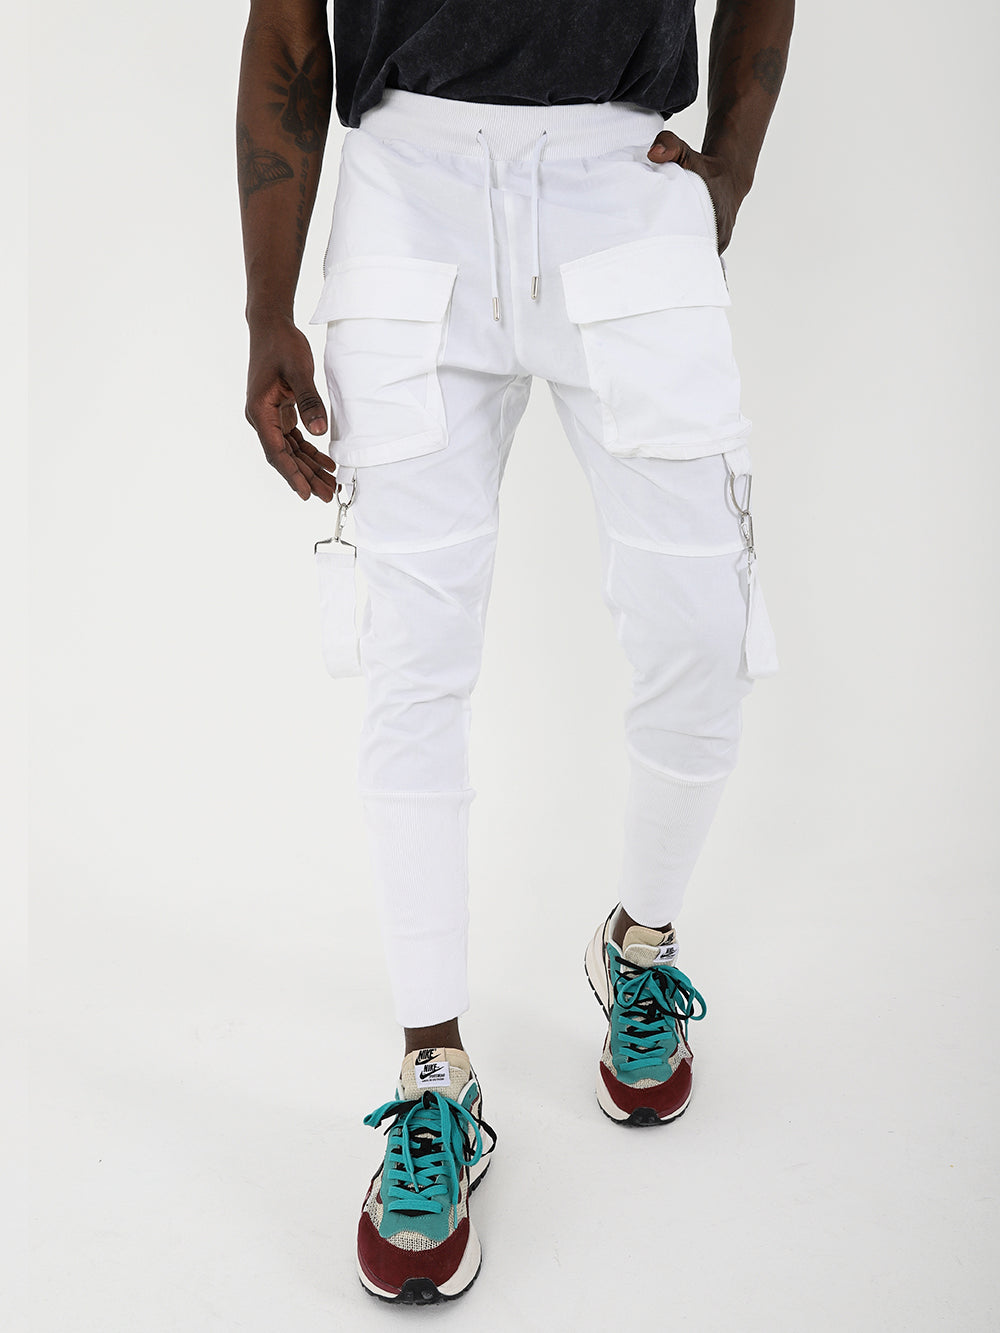 A slim fit jogger wearing white cargo pants and adjustable drawstring waist BROOKLYN JOGGERS sneakers.